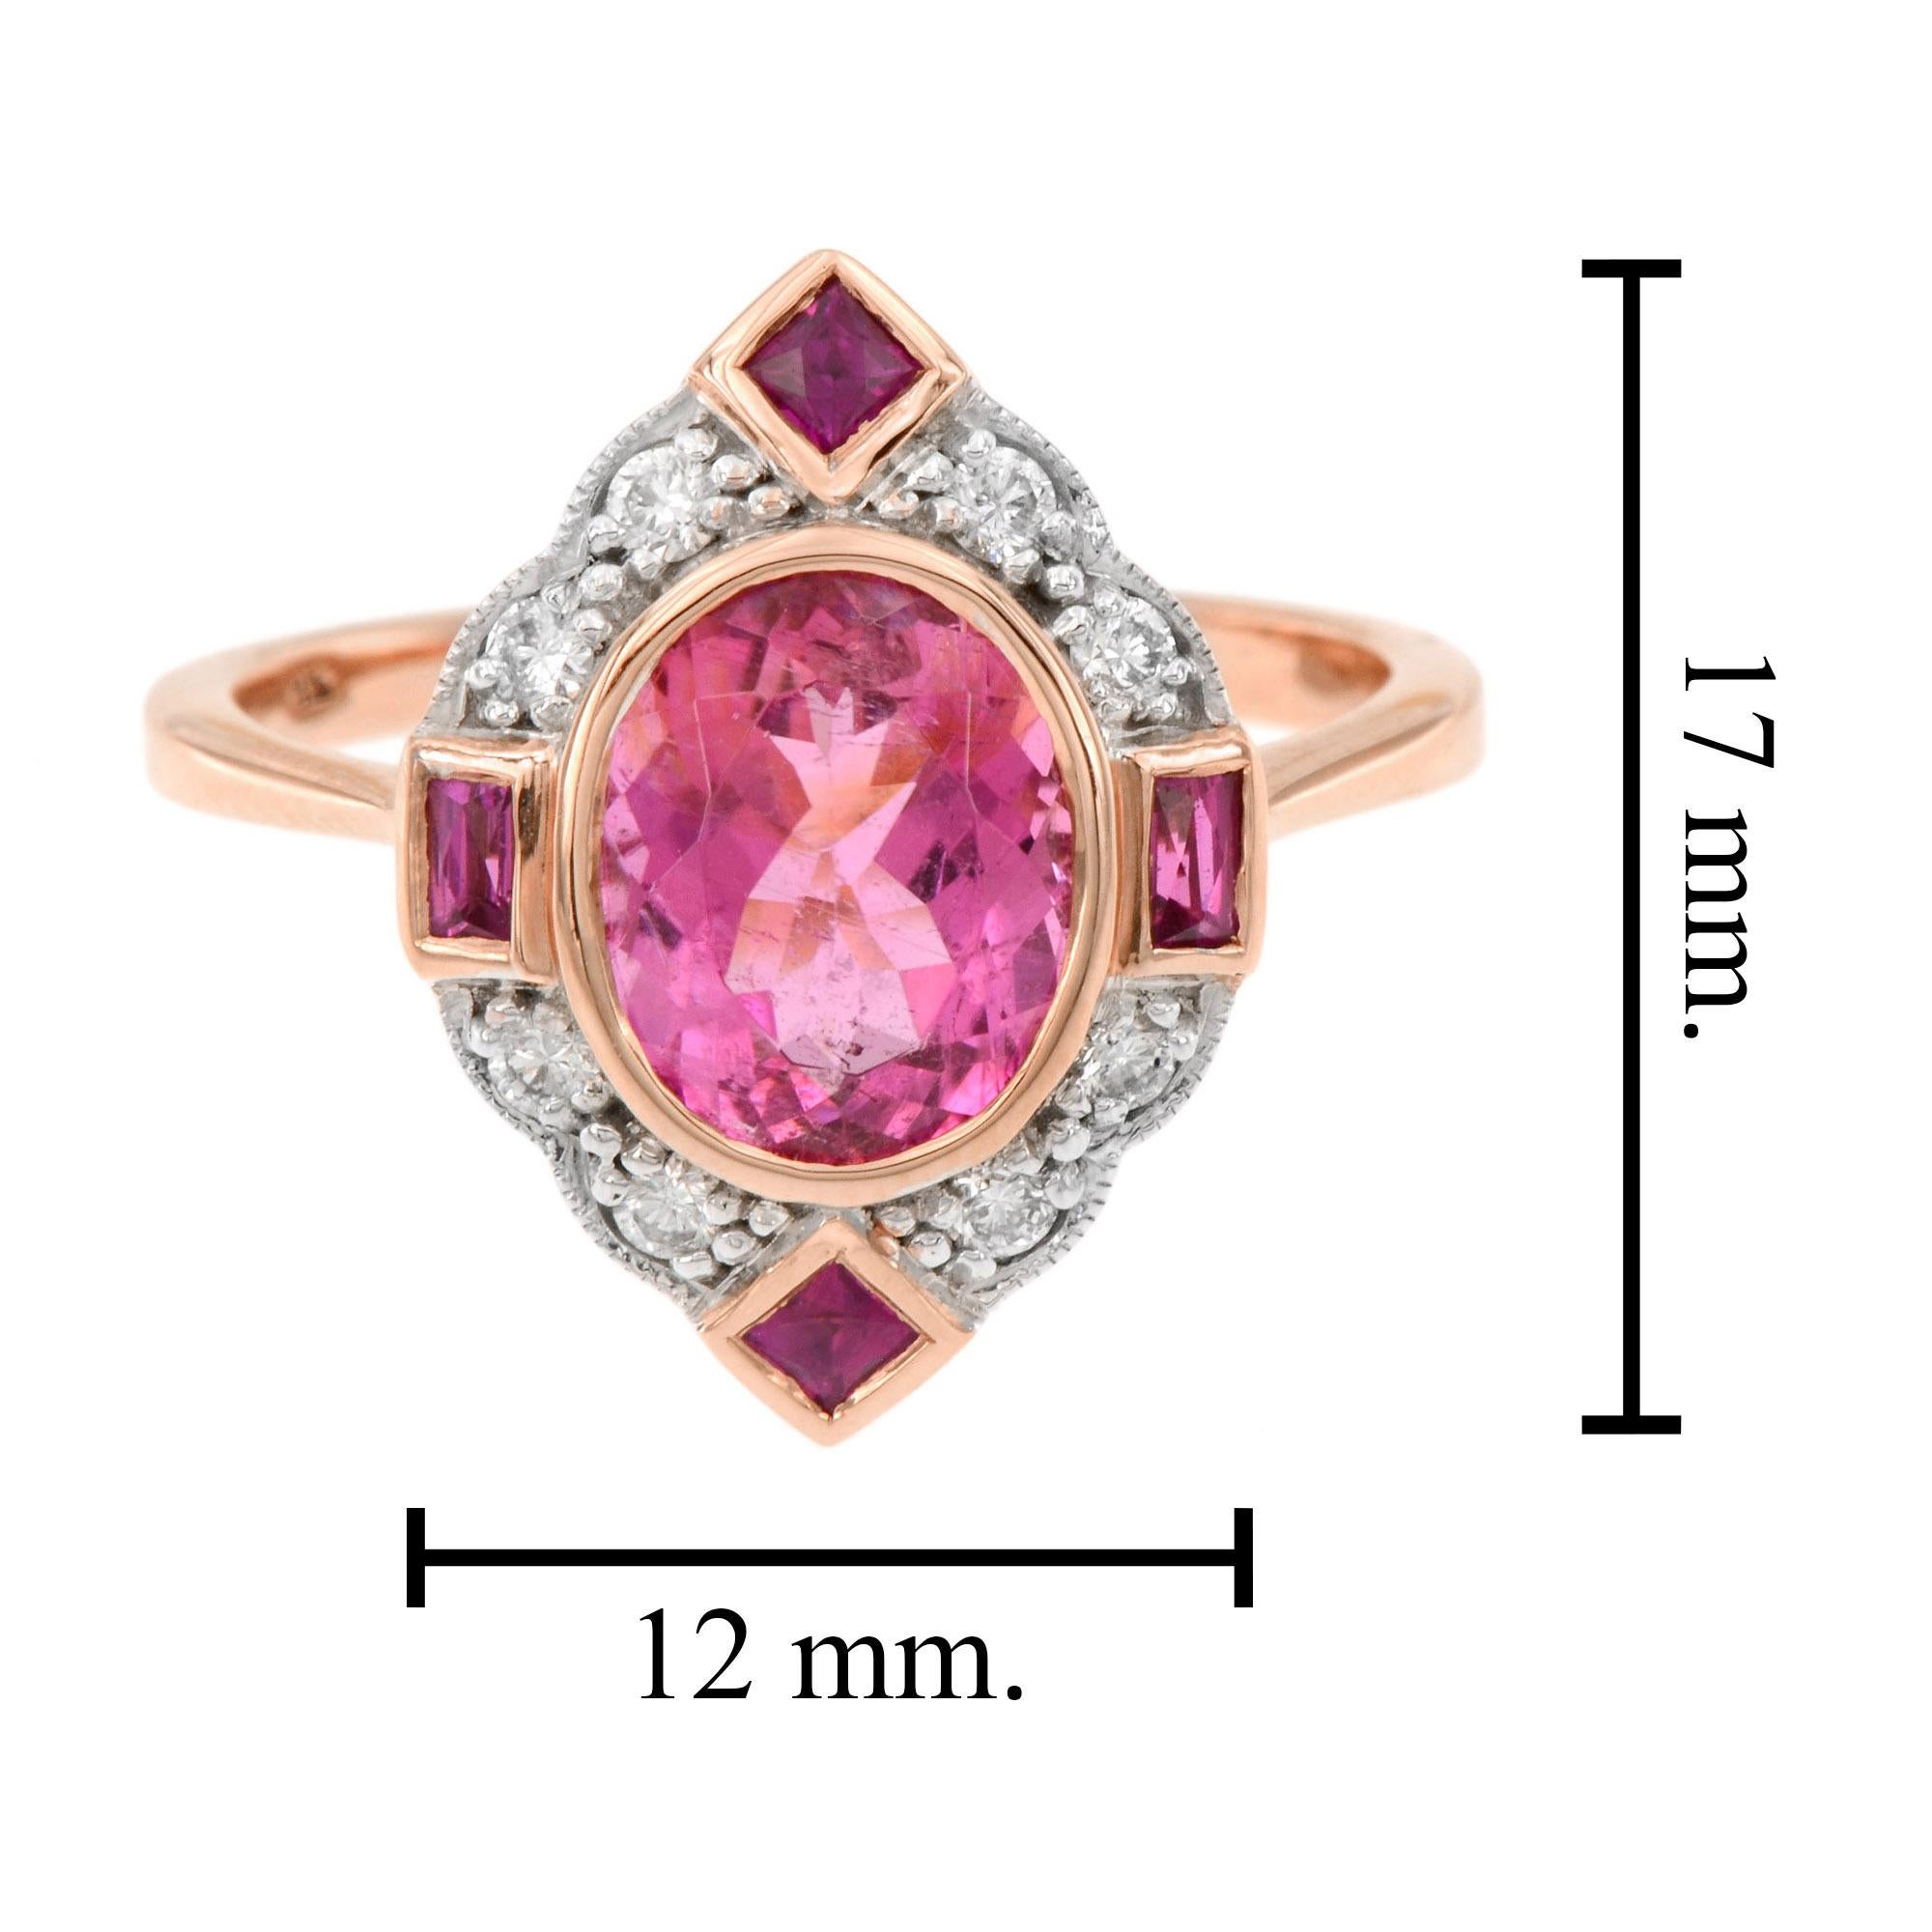 For Sale:  2.20 Ct. Tourmaline Ruby Diamond Vintage Inspired Engagement Ring in 14K Gold 7